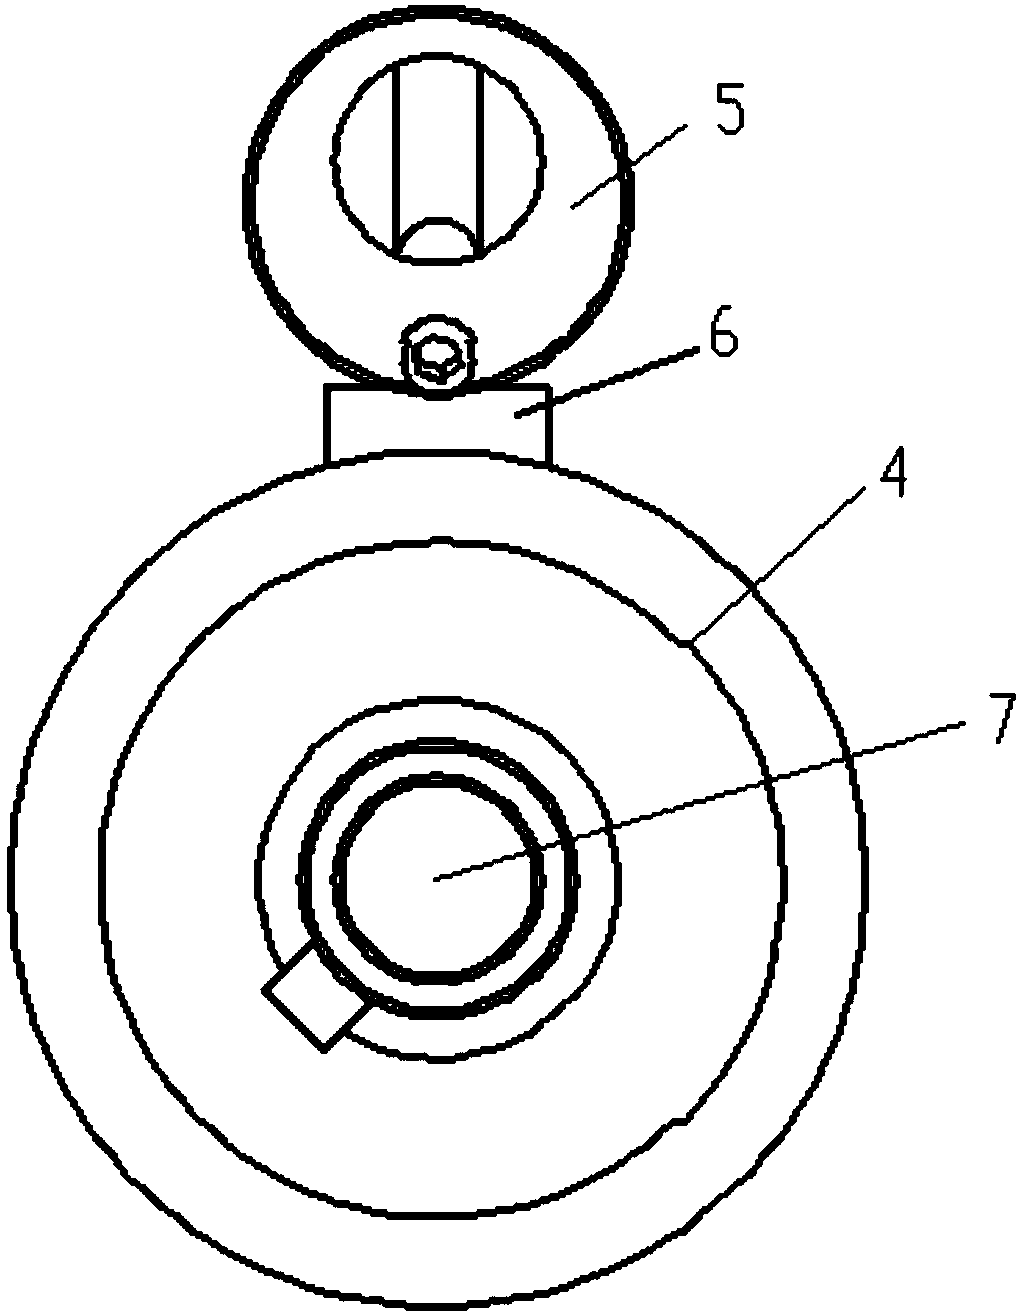 Space cam for slot machine transmission mechanism